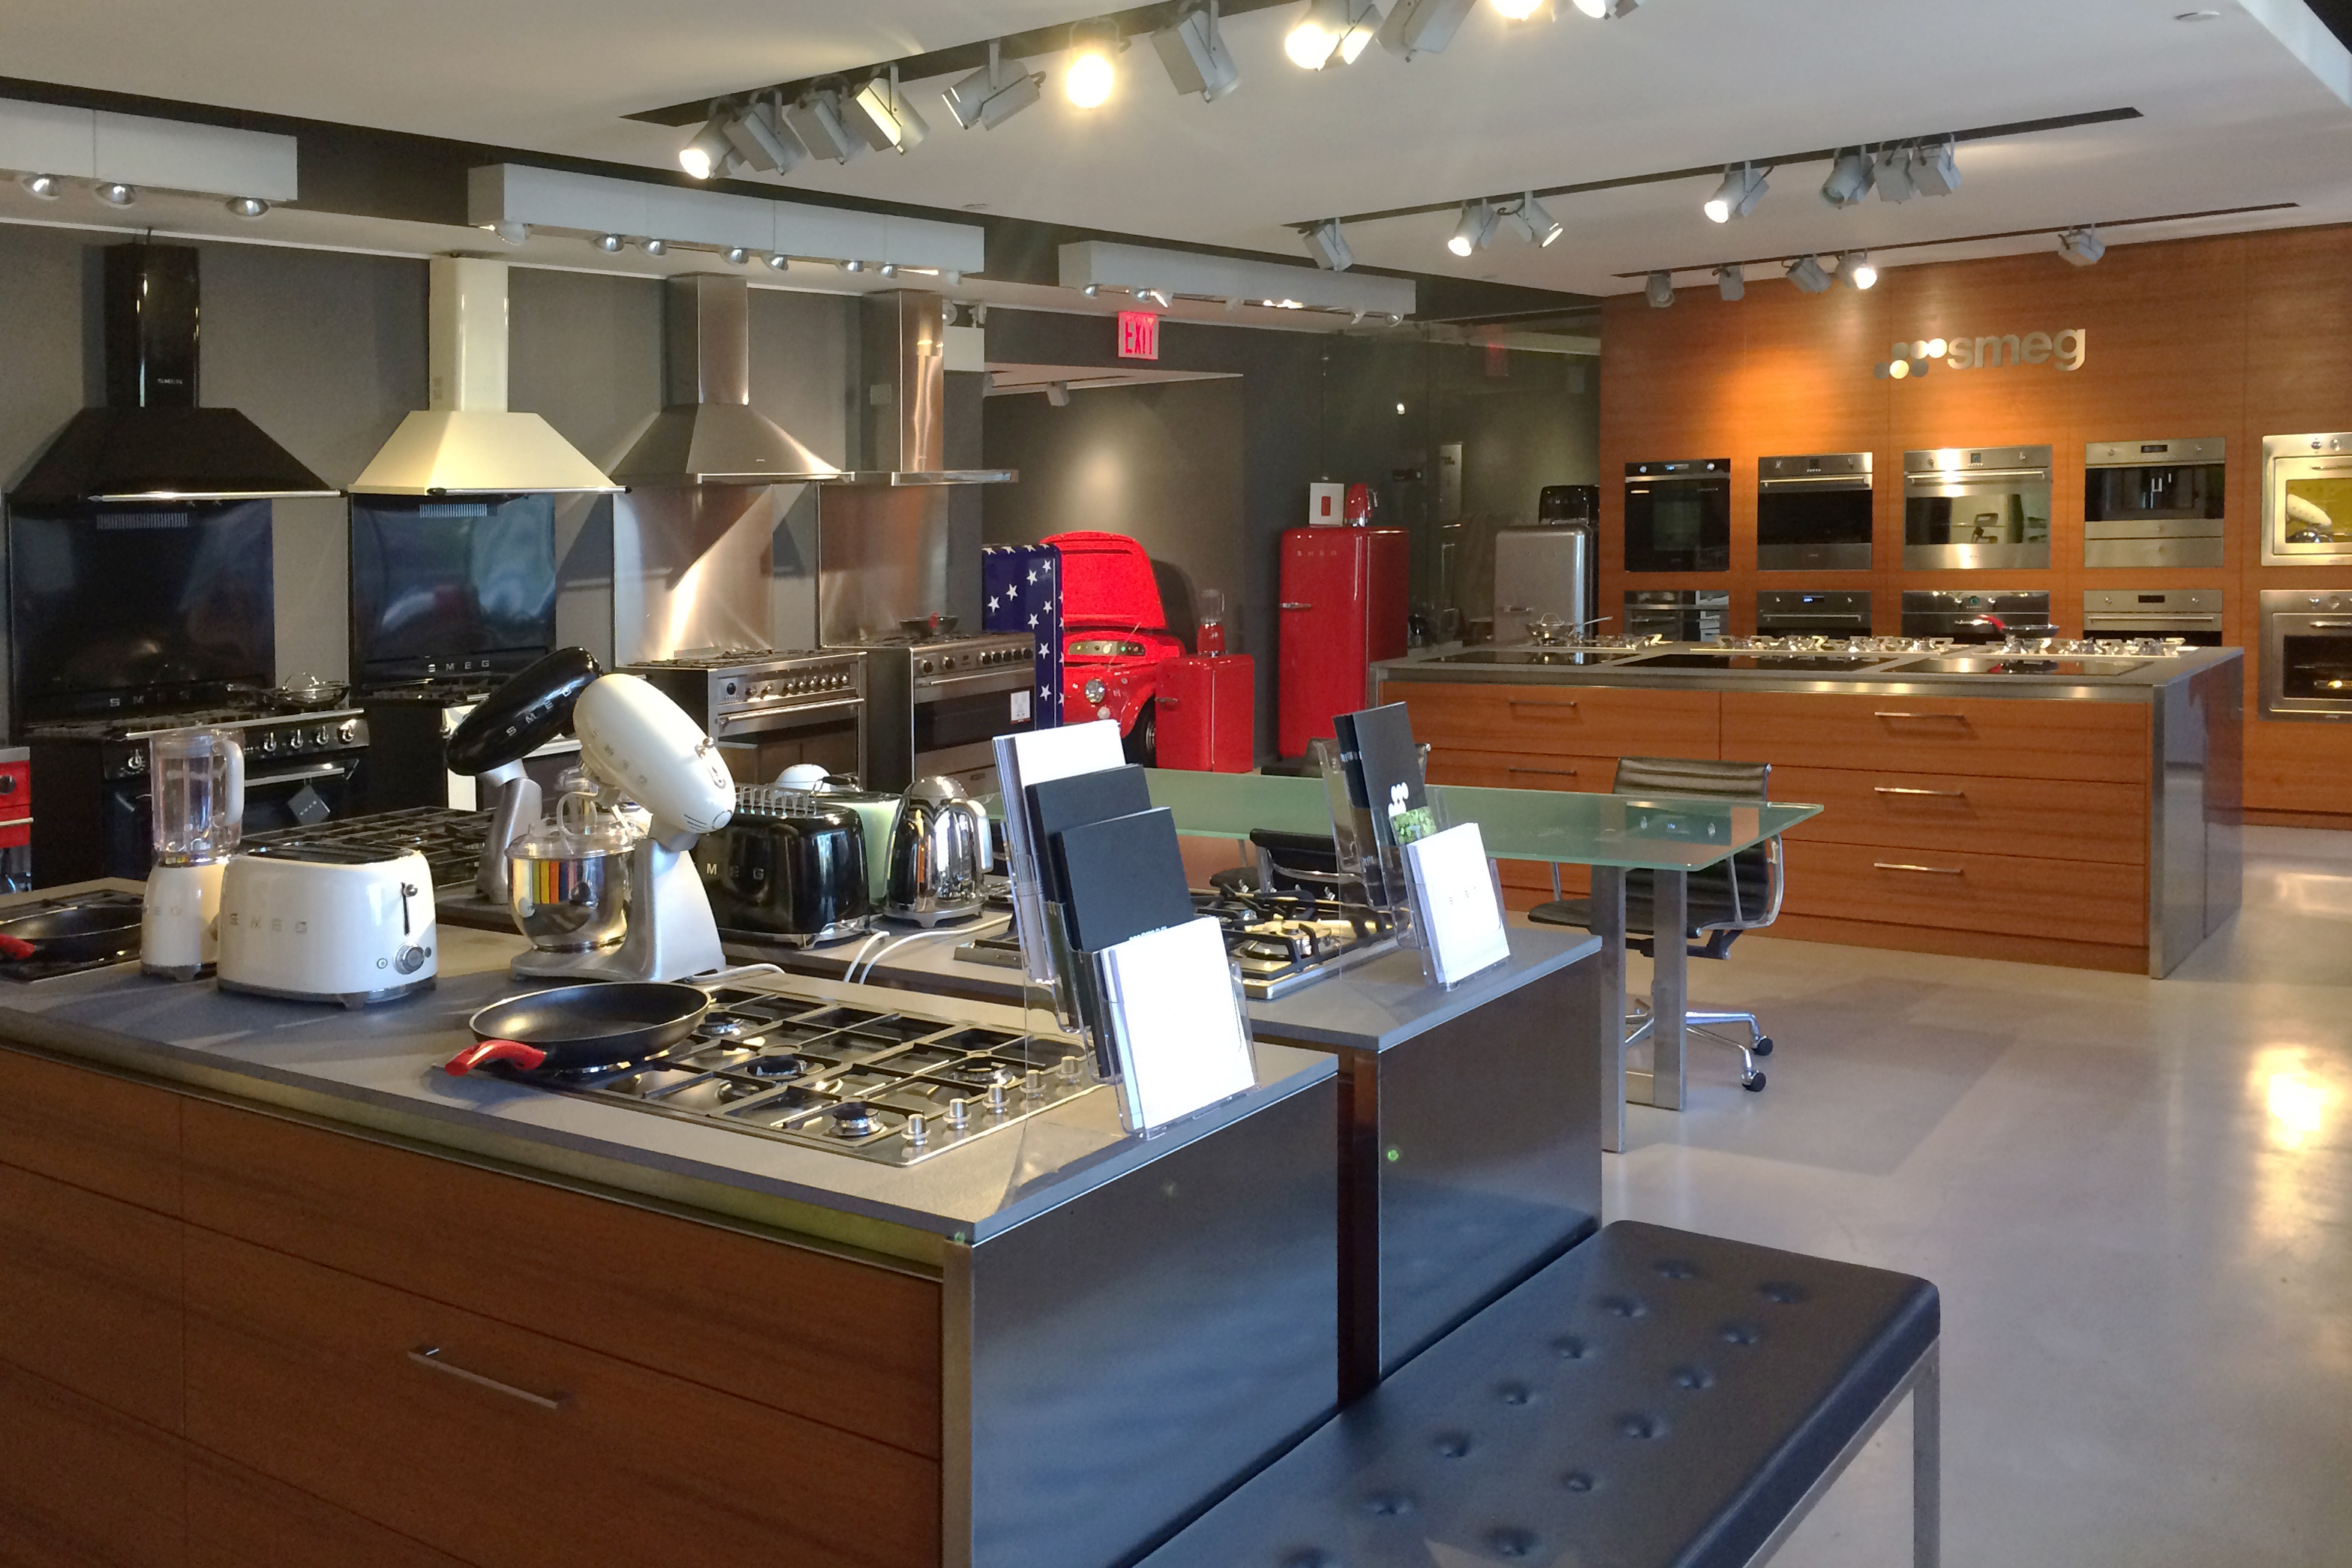 Special events at Smeg’s shop in New York - Home Appliances